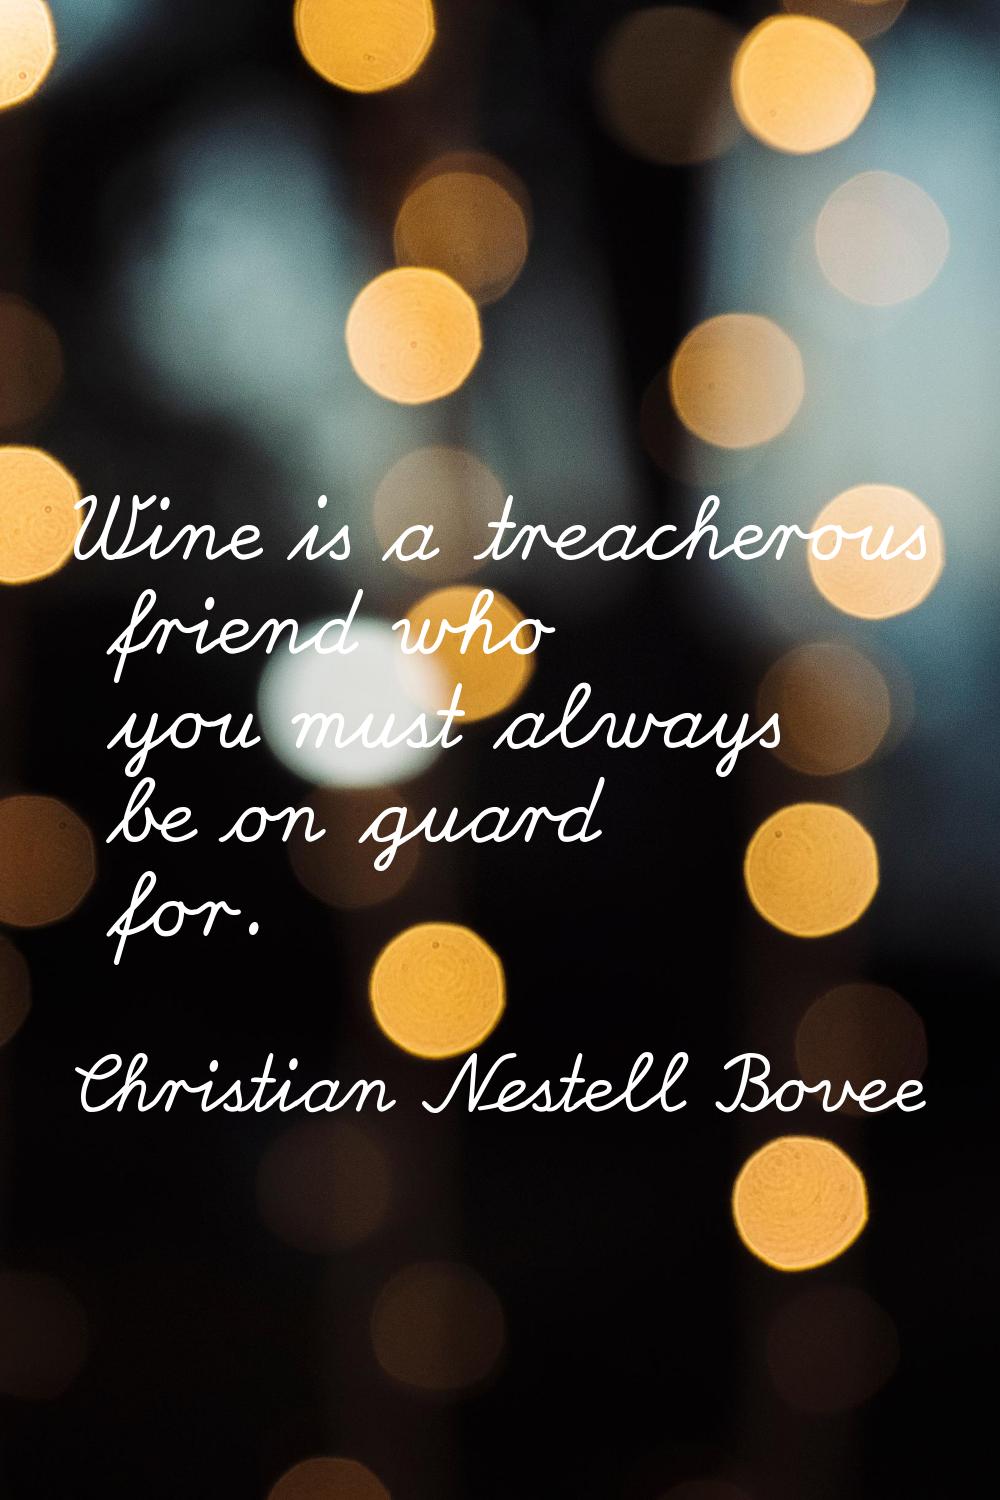 Wine is a treacherous friend who you must always be on guard for.